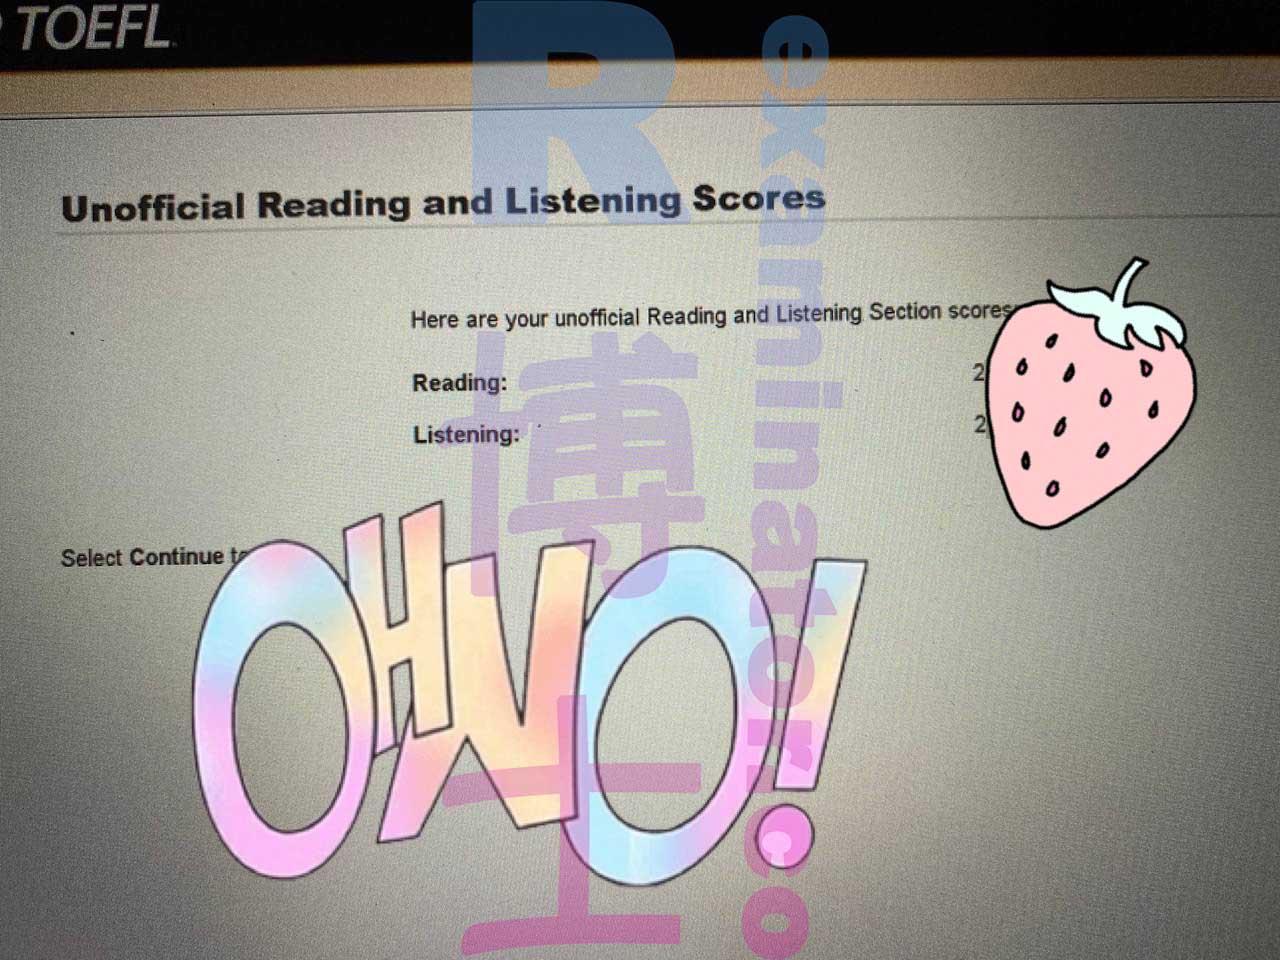 score image for TOEFL Cheating success story #419